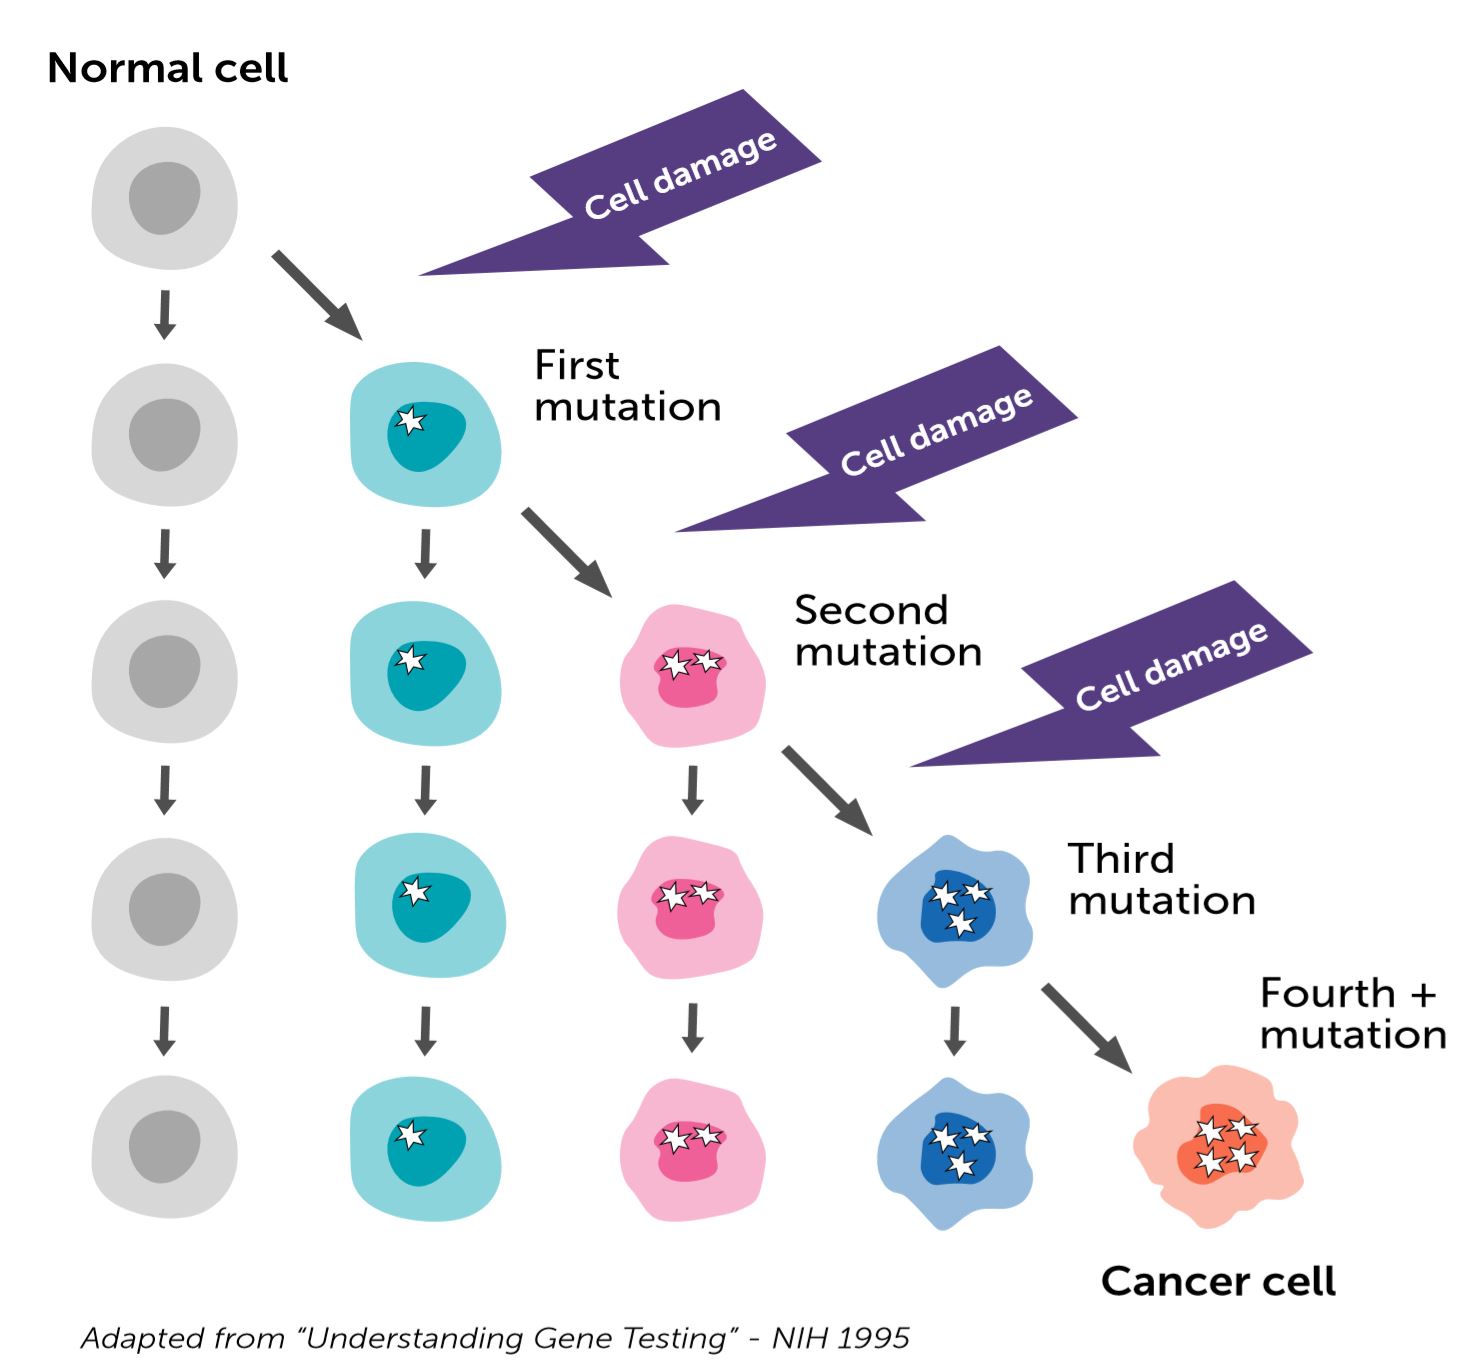 A guide to cancer genomics